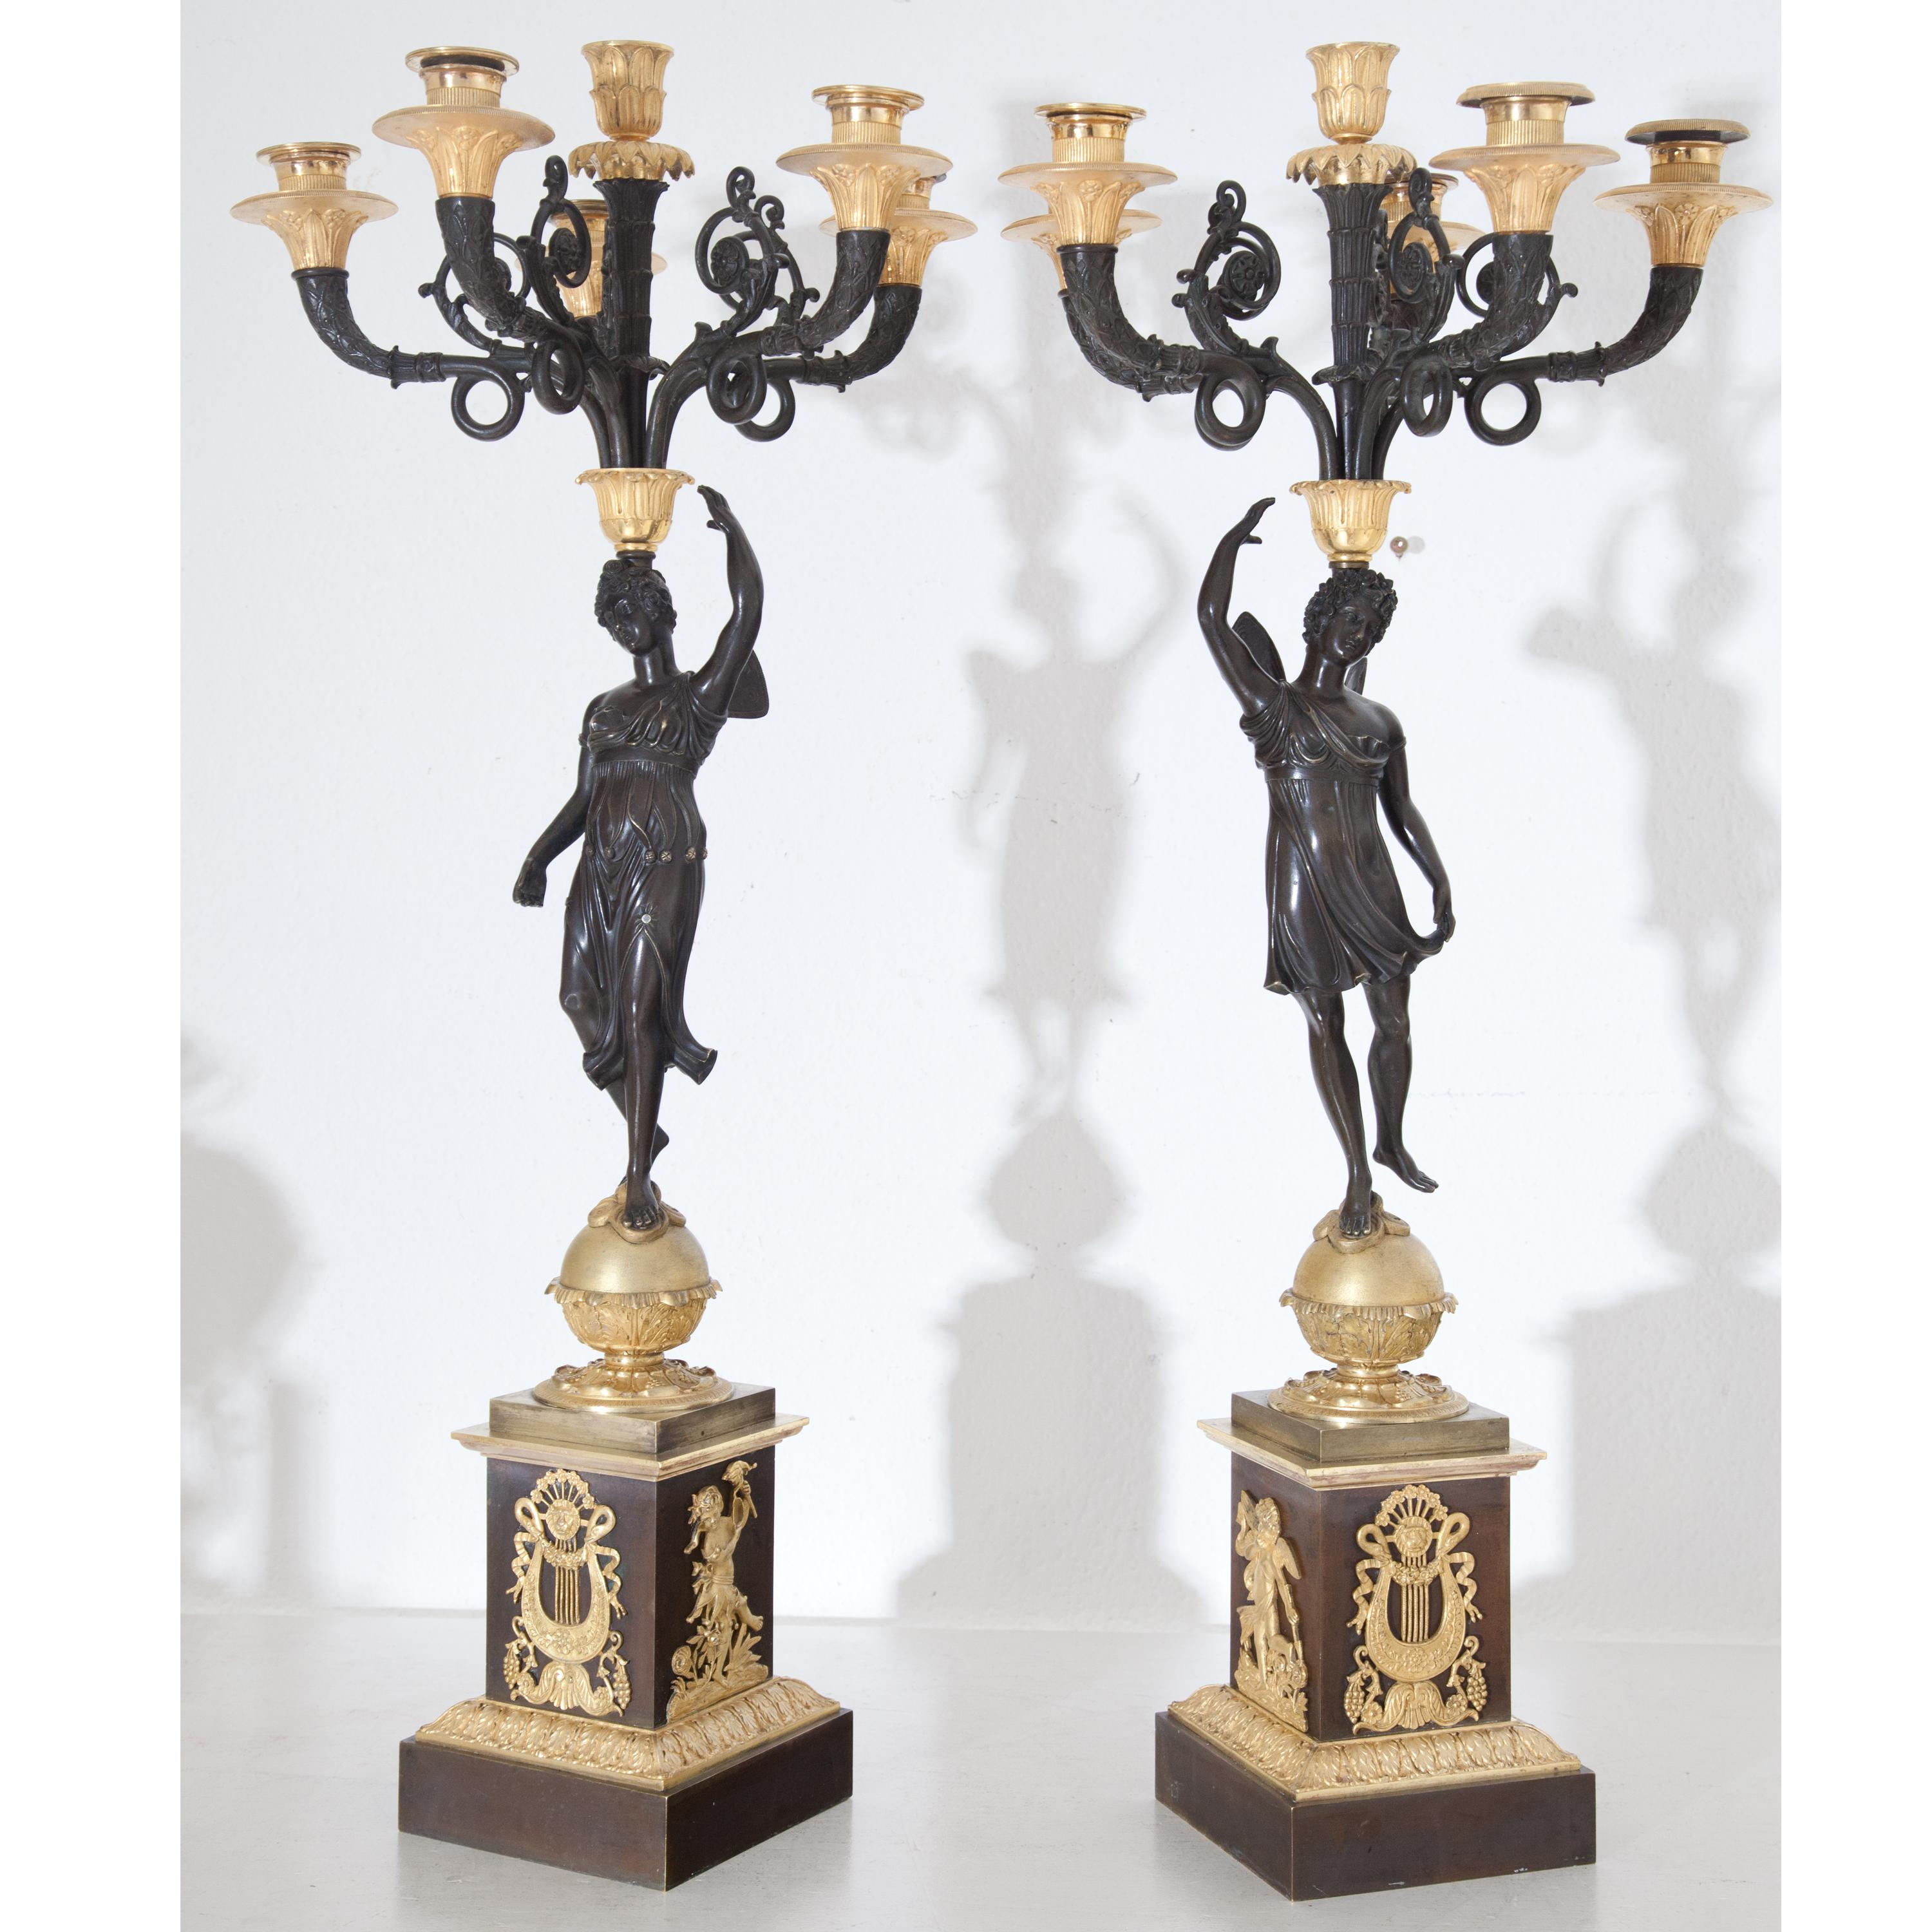 Pair of six-flamed girandoles with winged psyches on spheres, balancing the chandelier on their heads. Burnished square pedestals with lyre and Amoretti decoration. Bronze, fire-gilt. (measurements plinth: 13 x 13 cm).